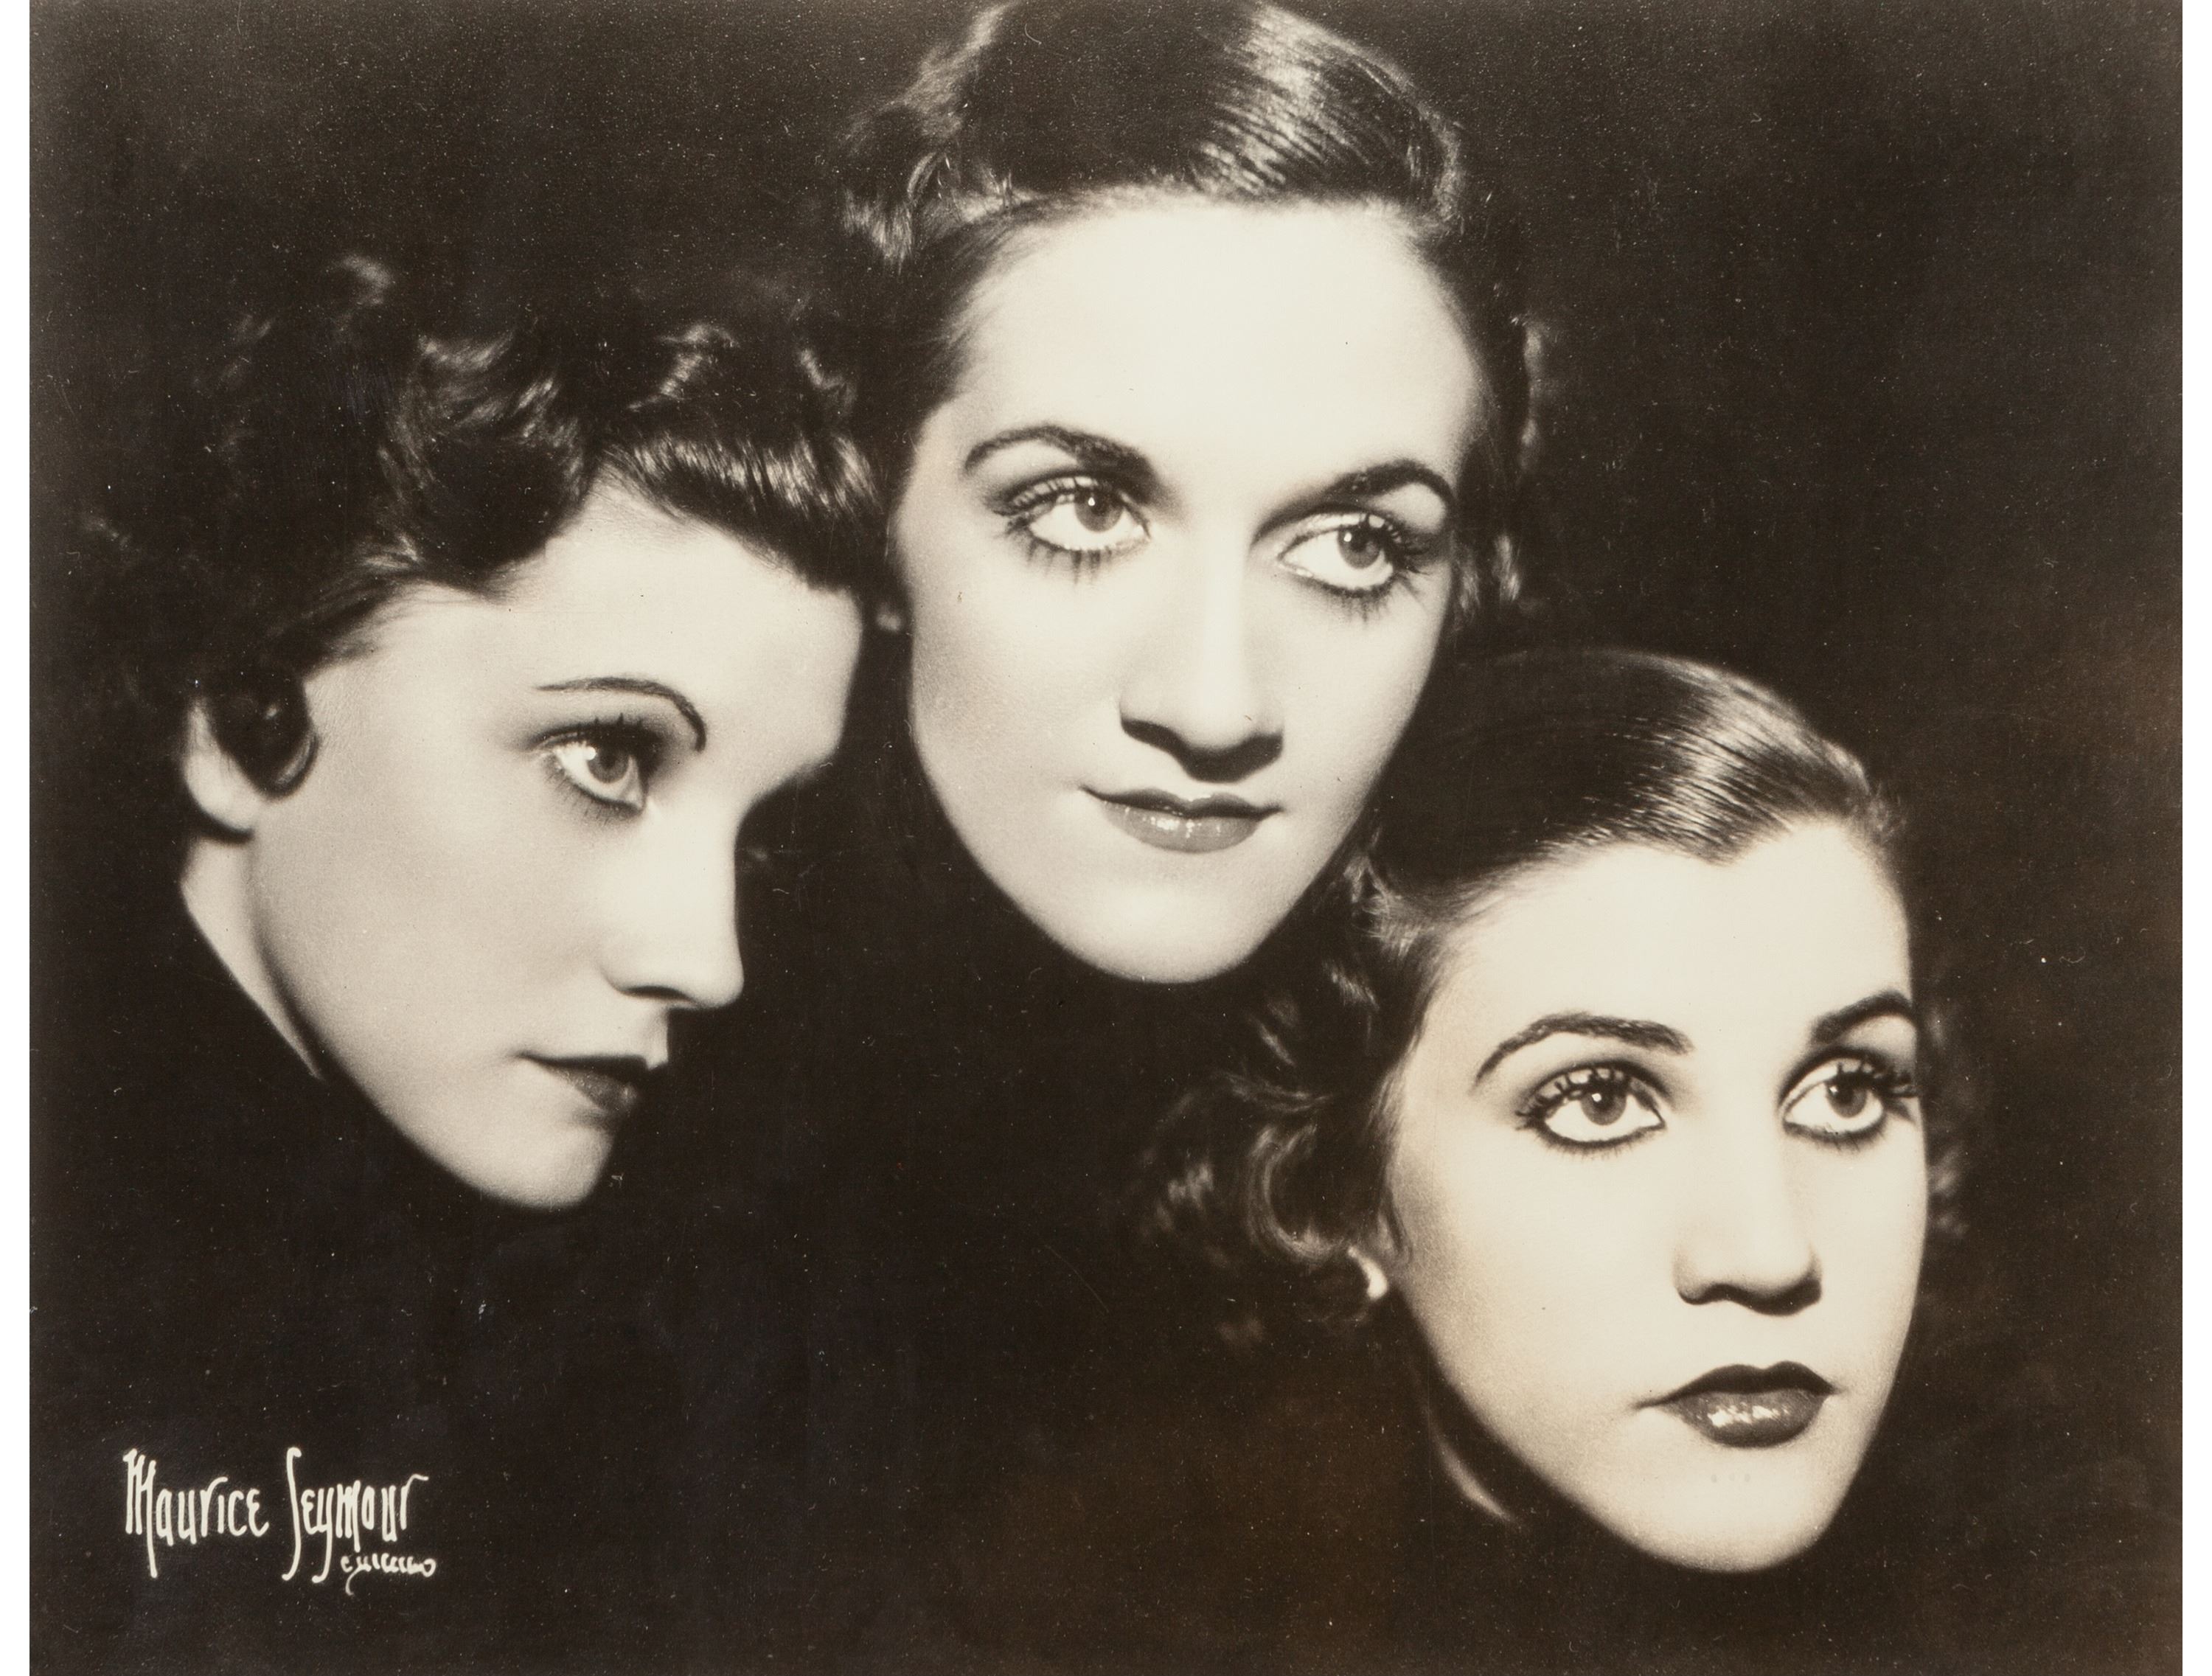 Three Faces, The Andrews Sisters by Maurice Seymour, circa 1930's